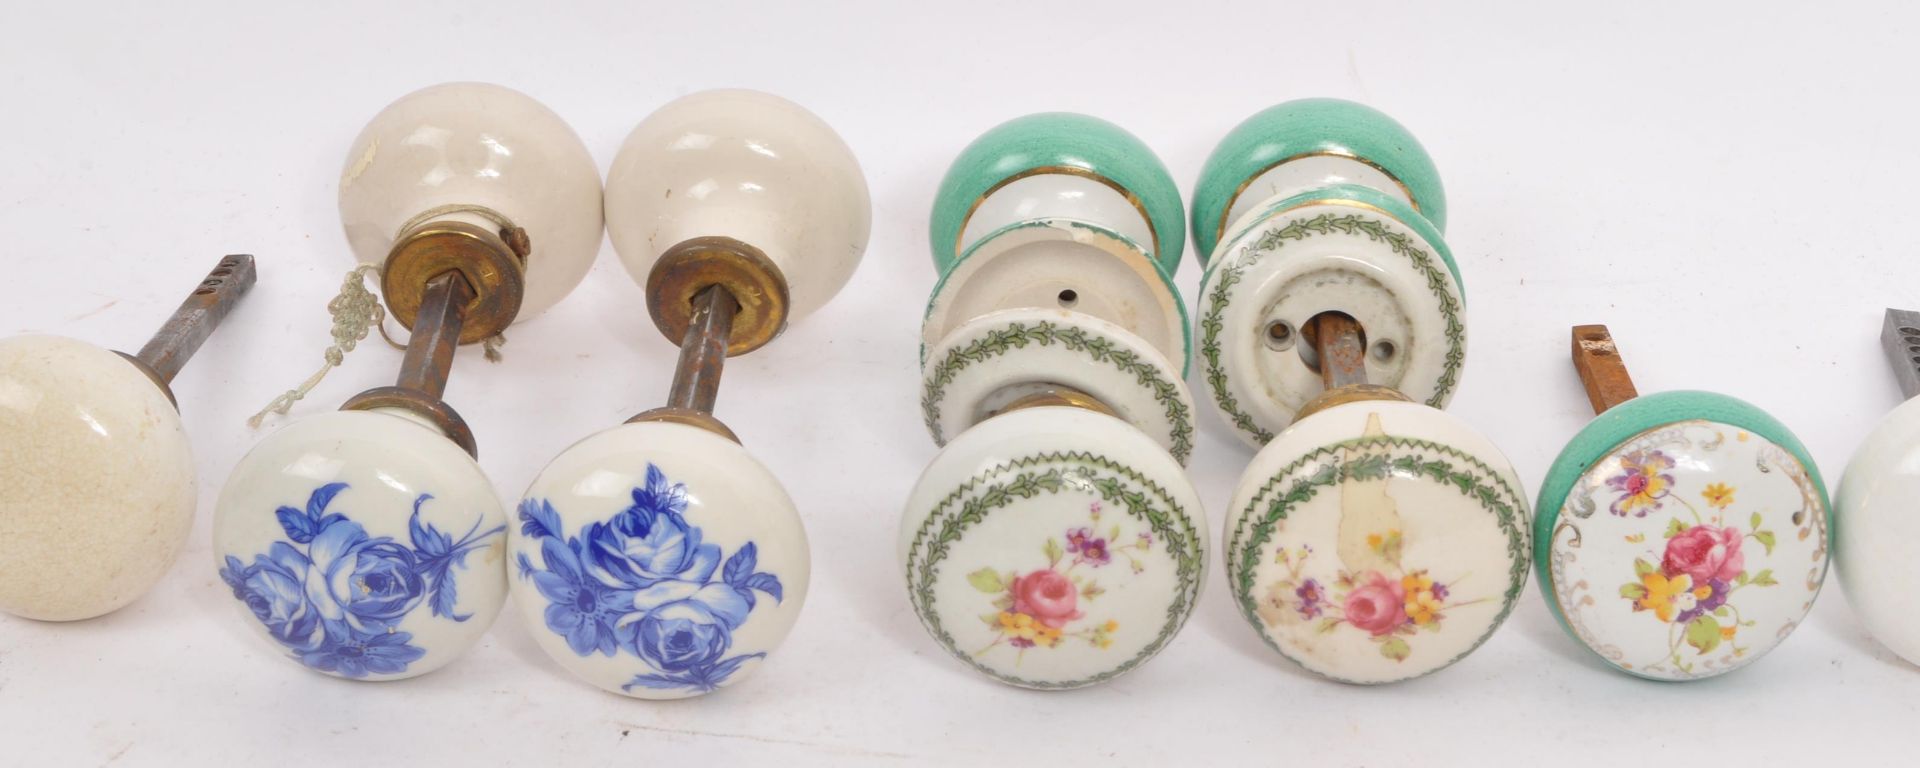 COLLECTION OF VICTORIAN & LATER CERAMIC DOOR HANDLES KNOBS - Image 2 of 7